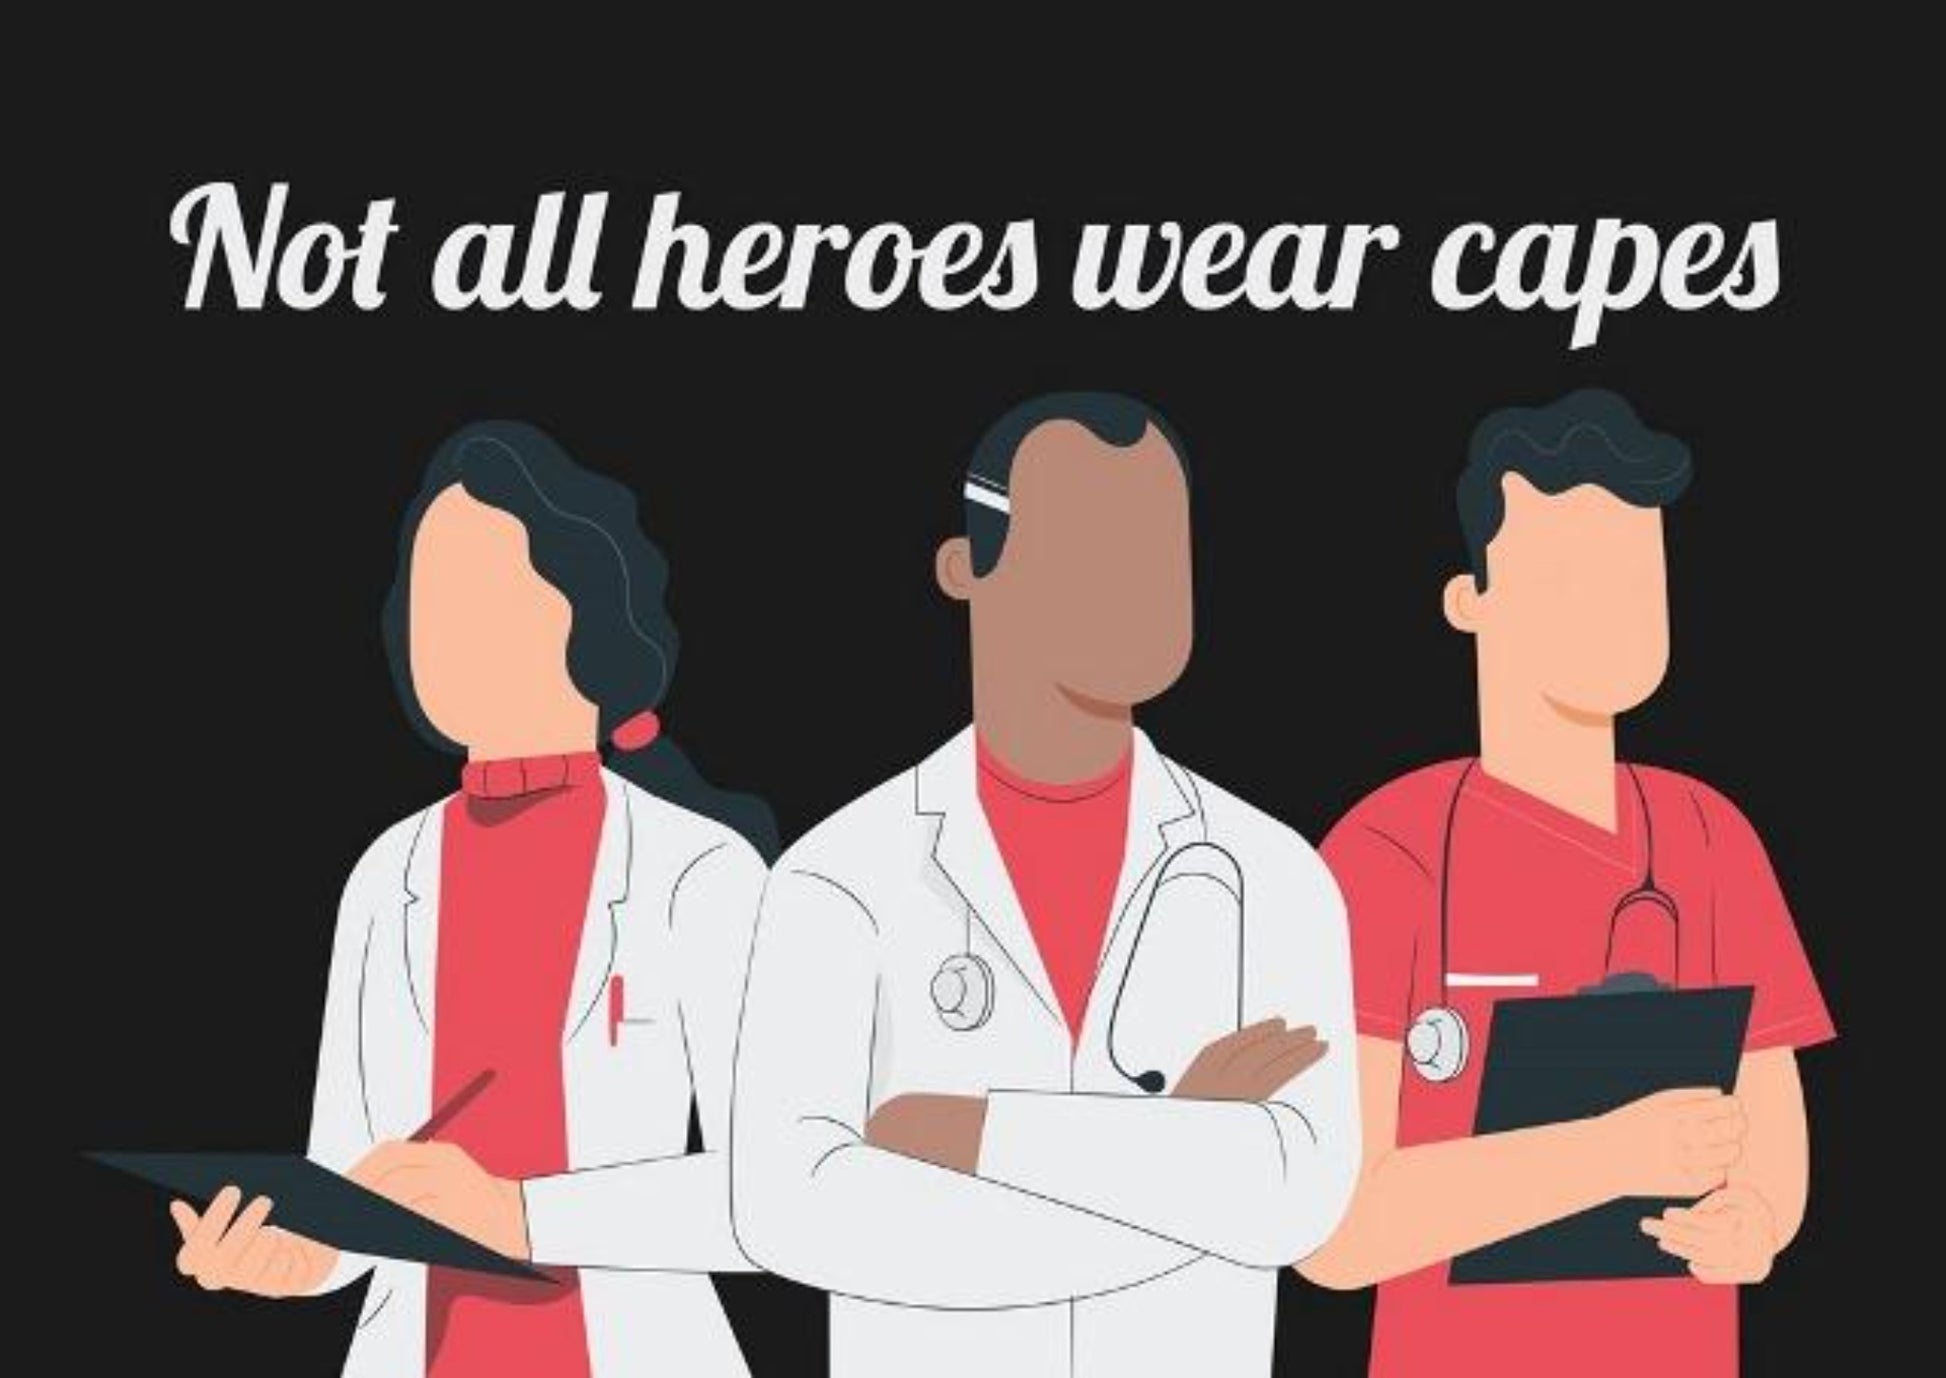 Not All Heroes Wear Capes (Black) Healthcare Workers Greeting Card.